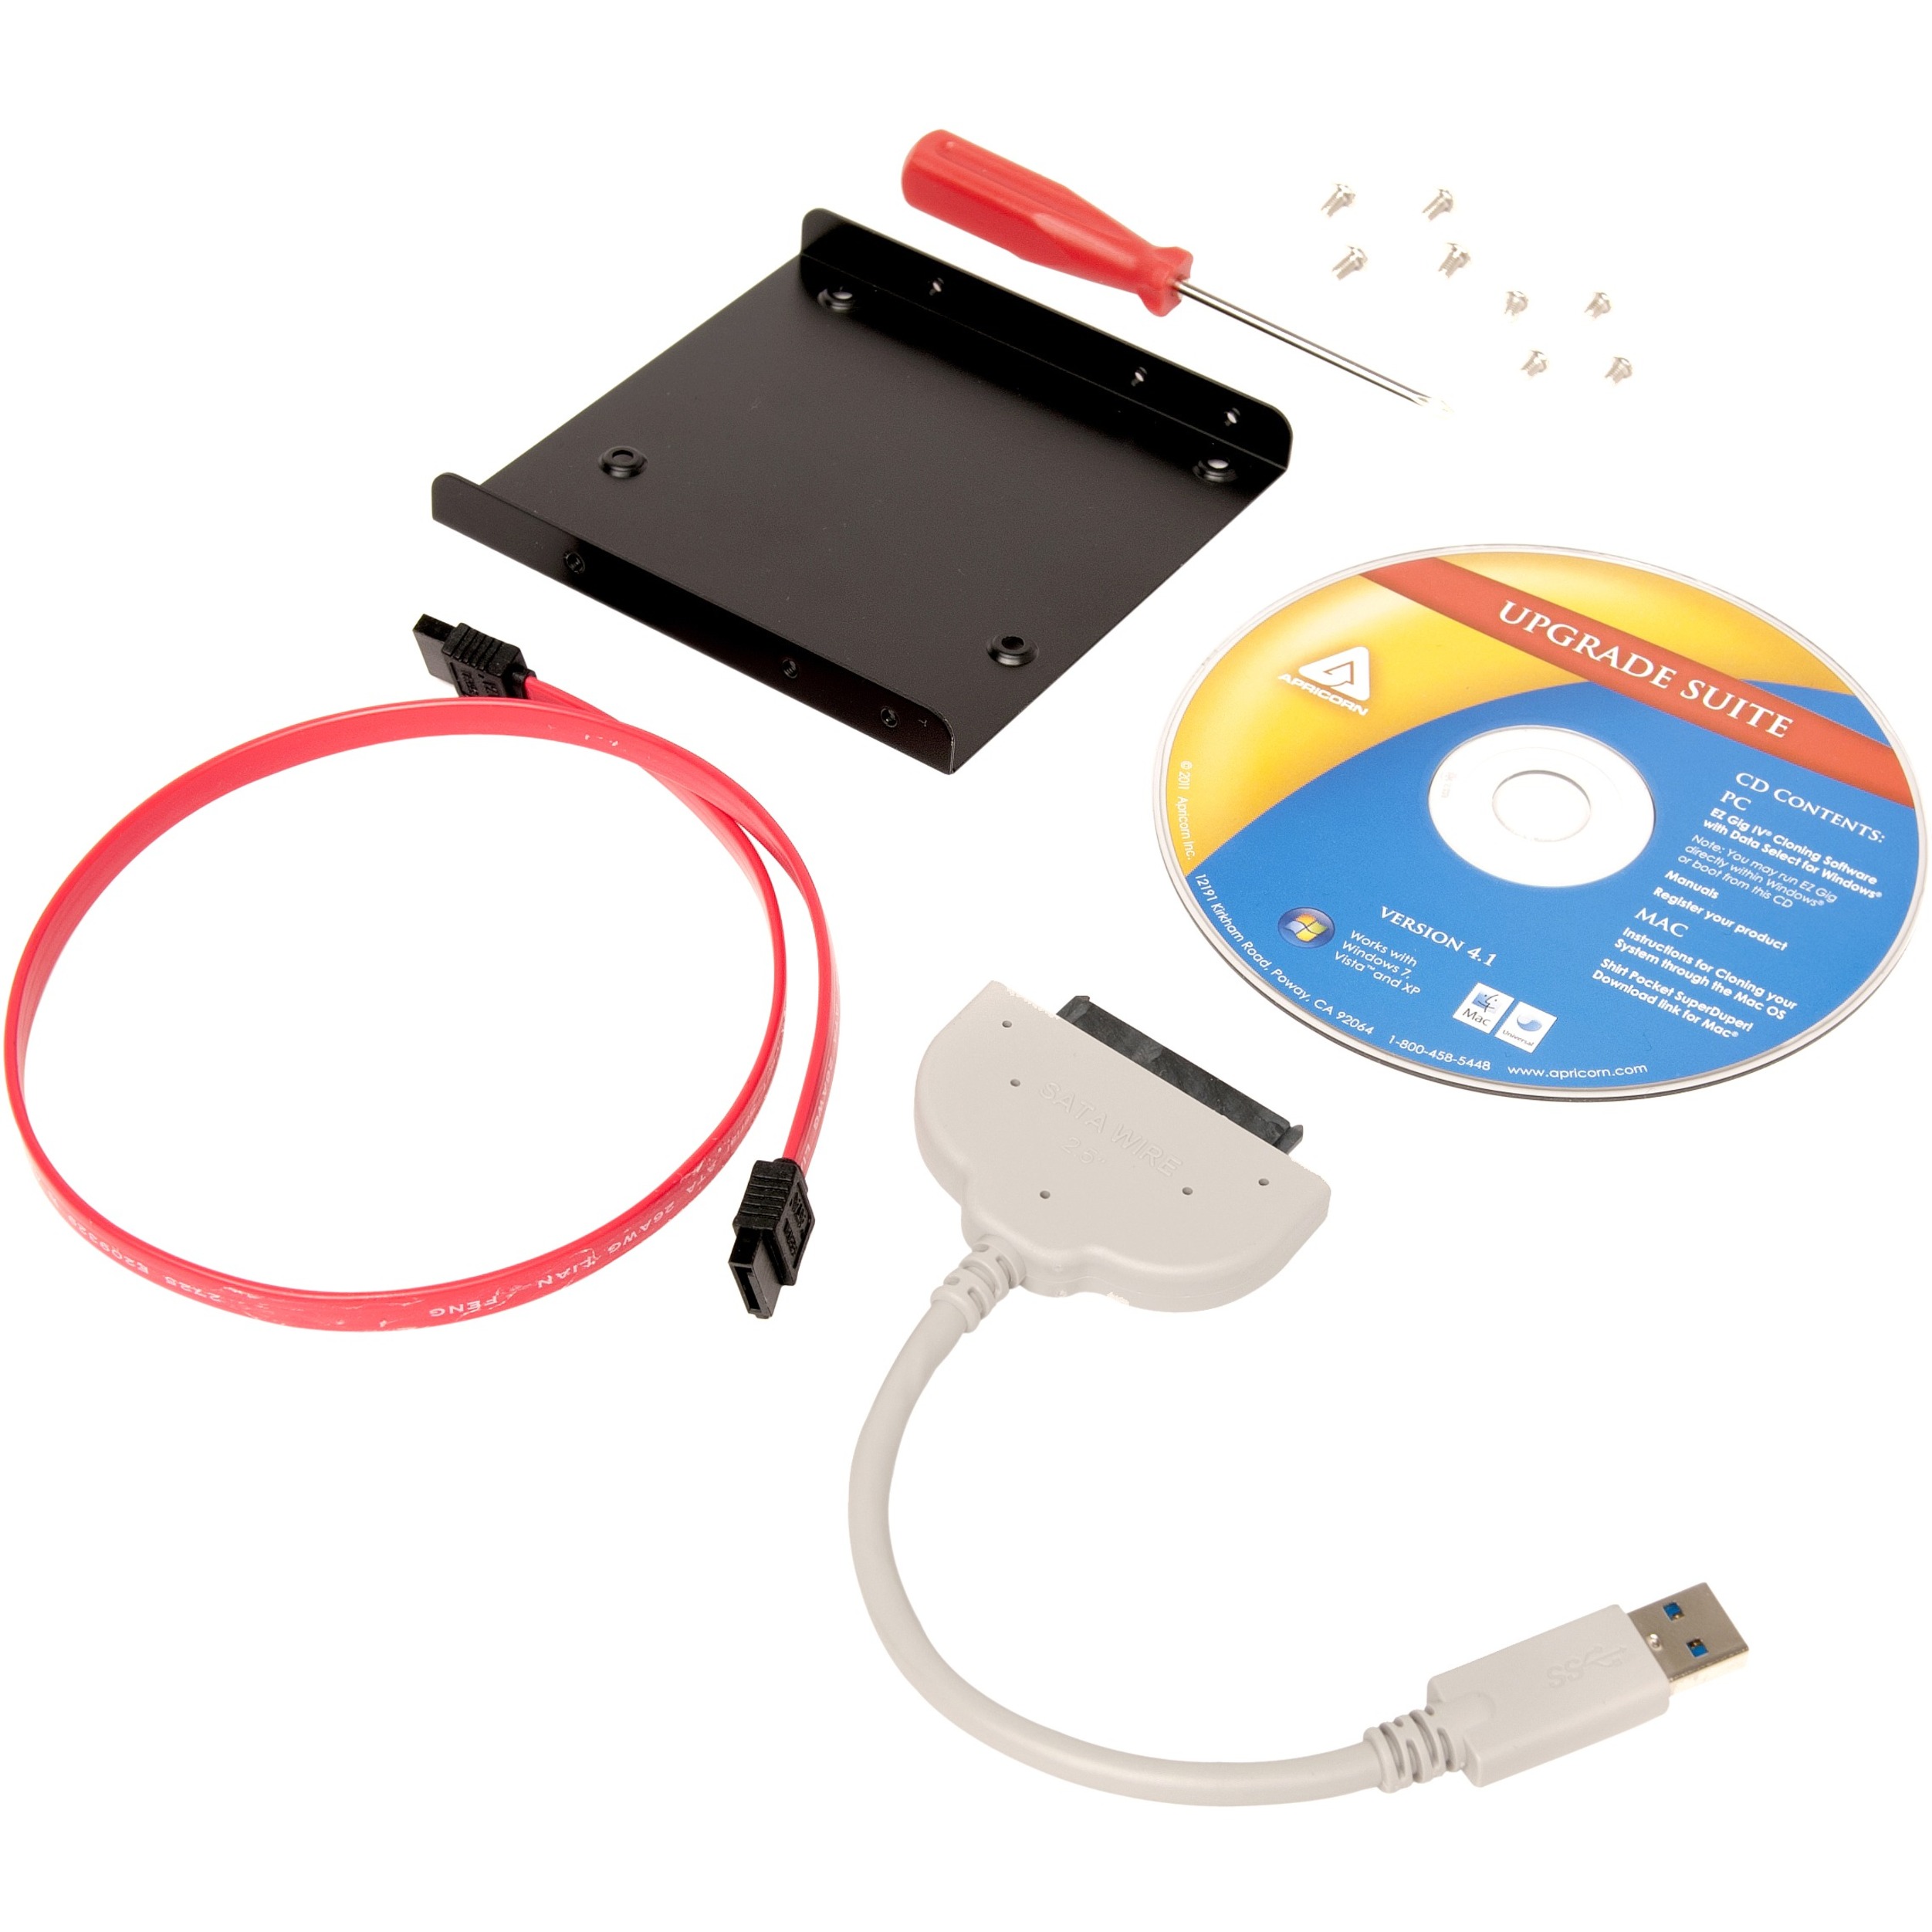 SSD Conversion Kit - image 1 of 2